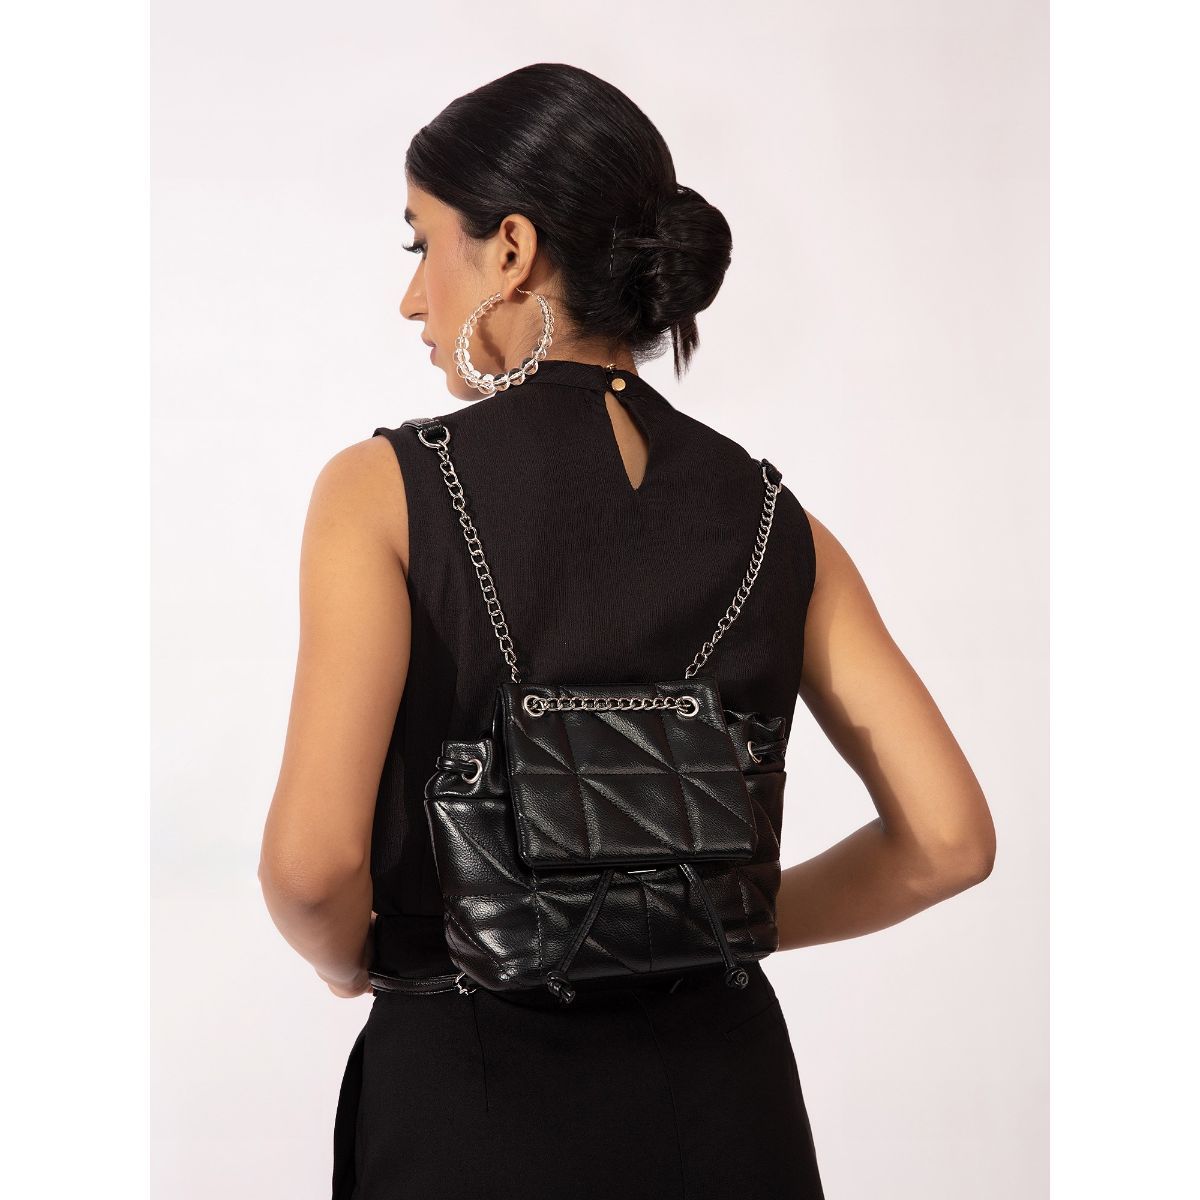 Twenty Dresses by Nykaa Fashion Black Quilted Chain Strap Small Backpack (Black) At Nykaa, Best Beauty Products Online